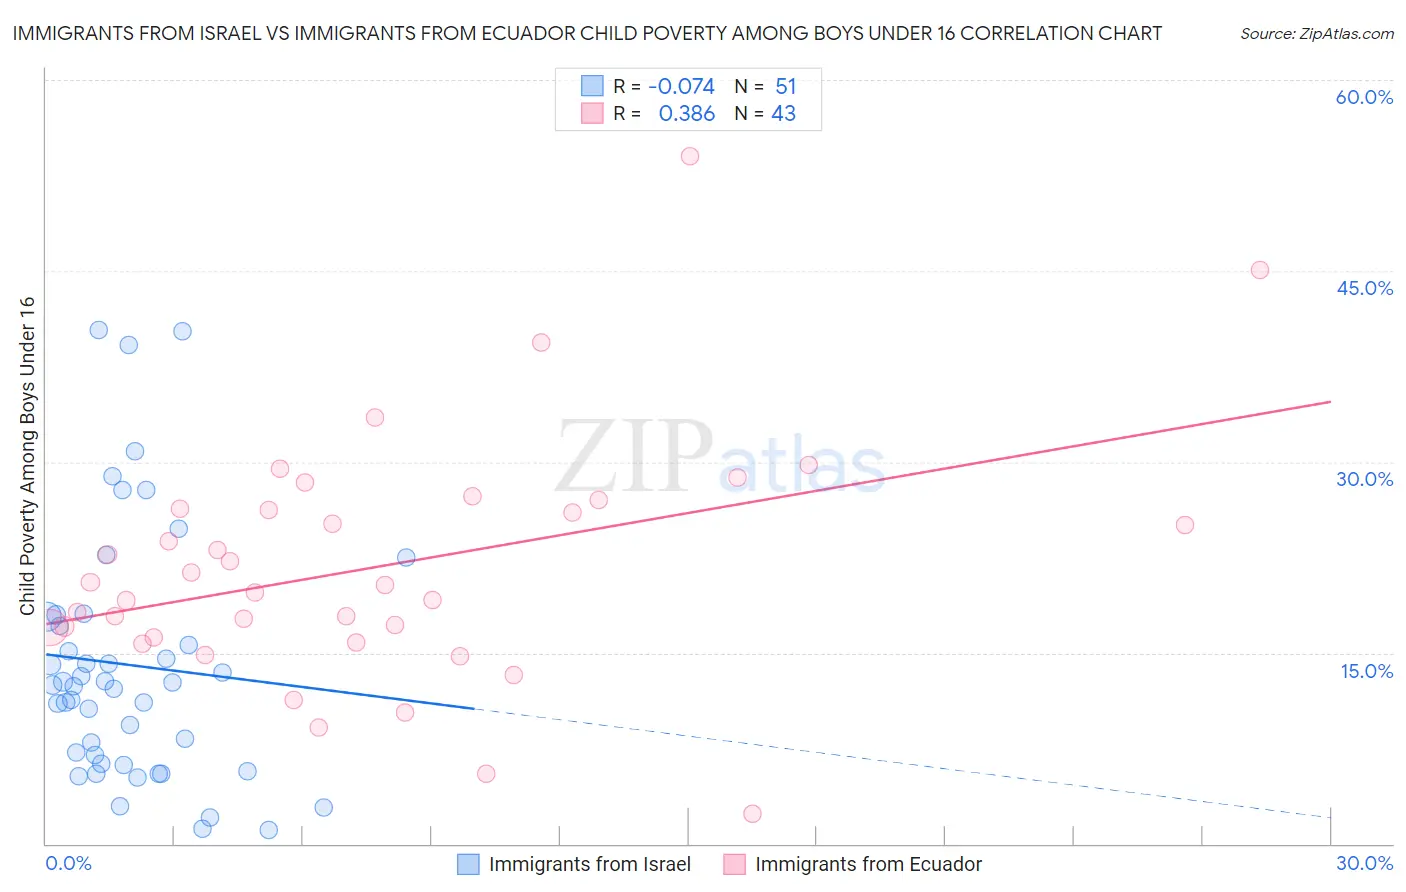 Immigrants from Israel vs Immigrants from Ecuador Child Poverty Among Boys Under 16